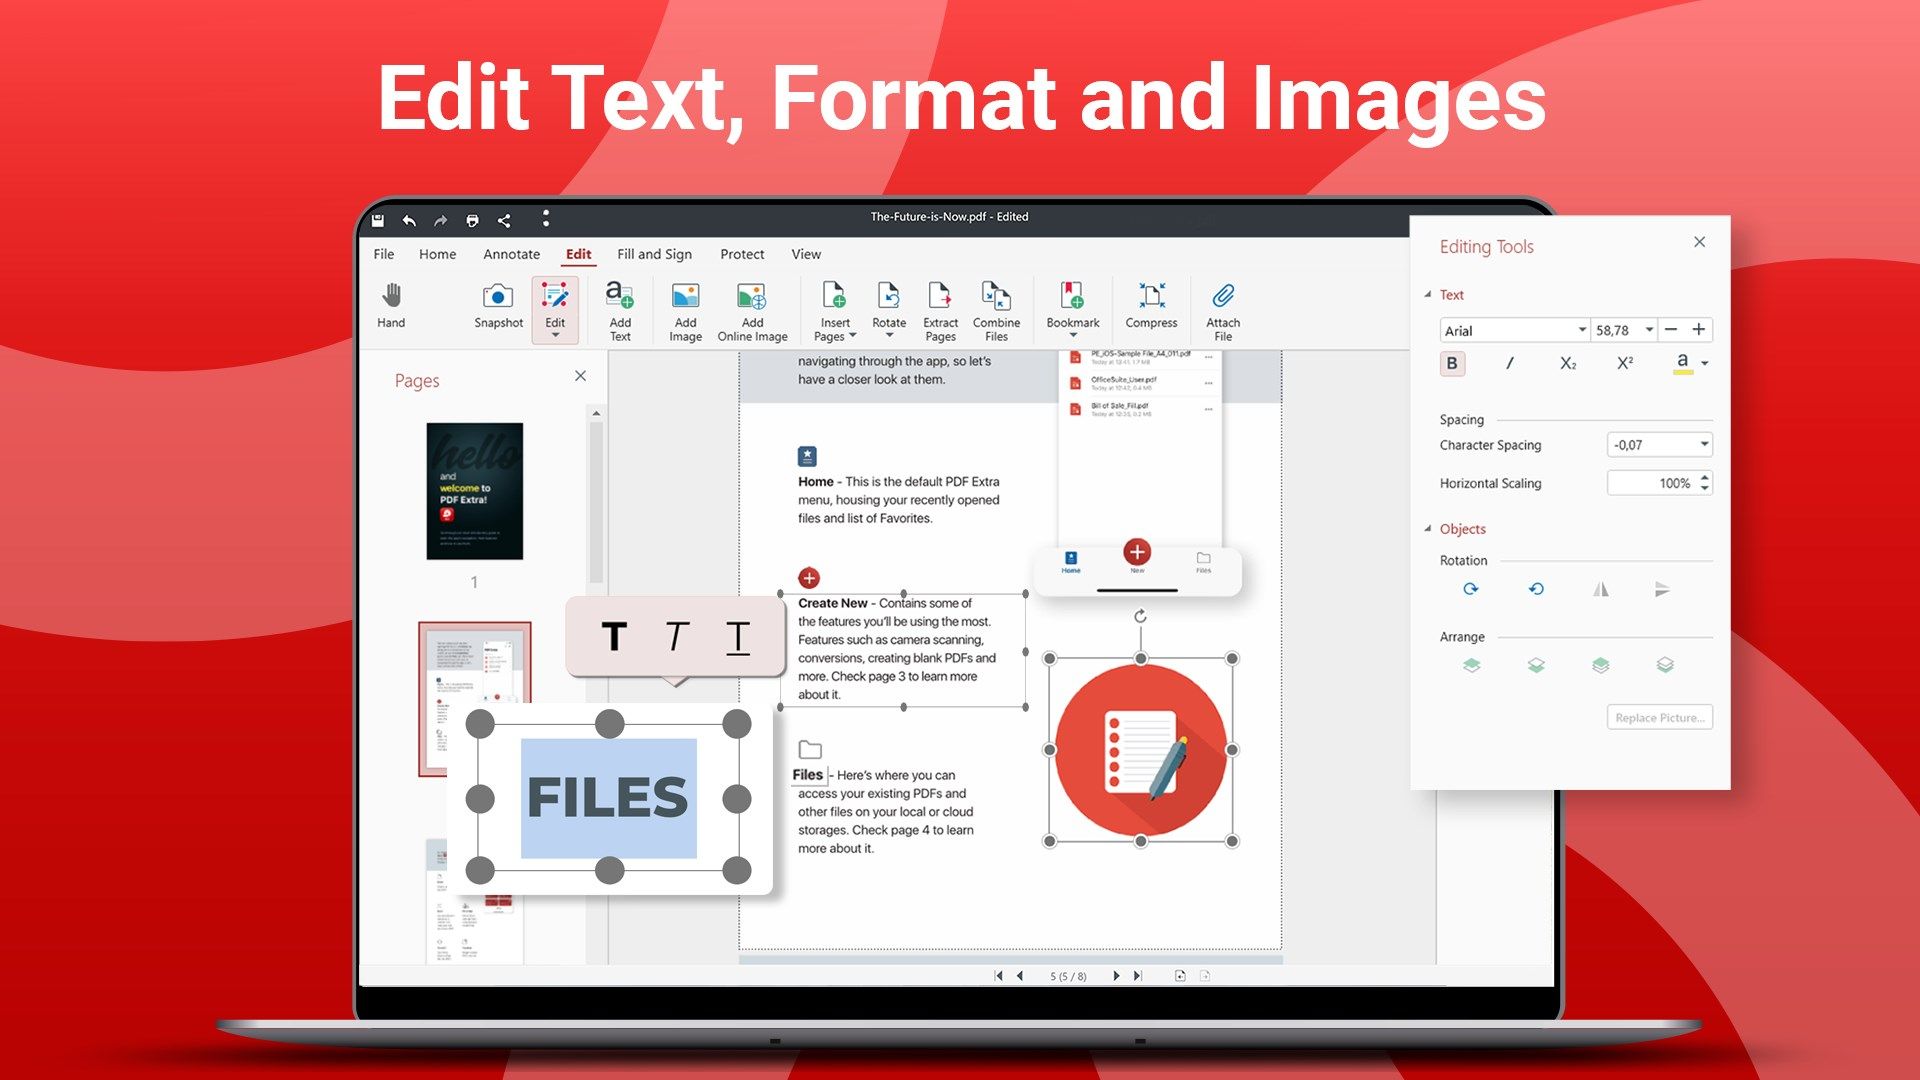 Edit, add, delete, or rotate texts. Finetune the structure via line spacing or virtual scaling. Finish it off by tweaking the text styles, fonts & coloring with the available PDF editor tool.